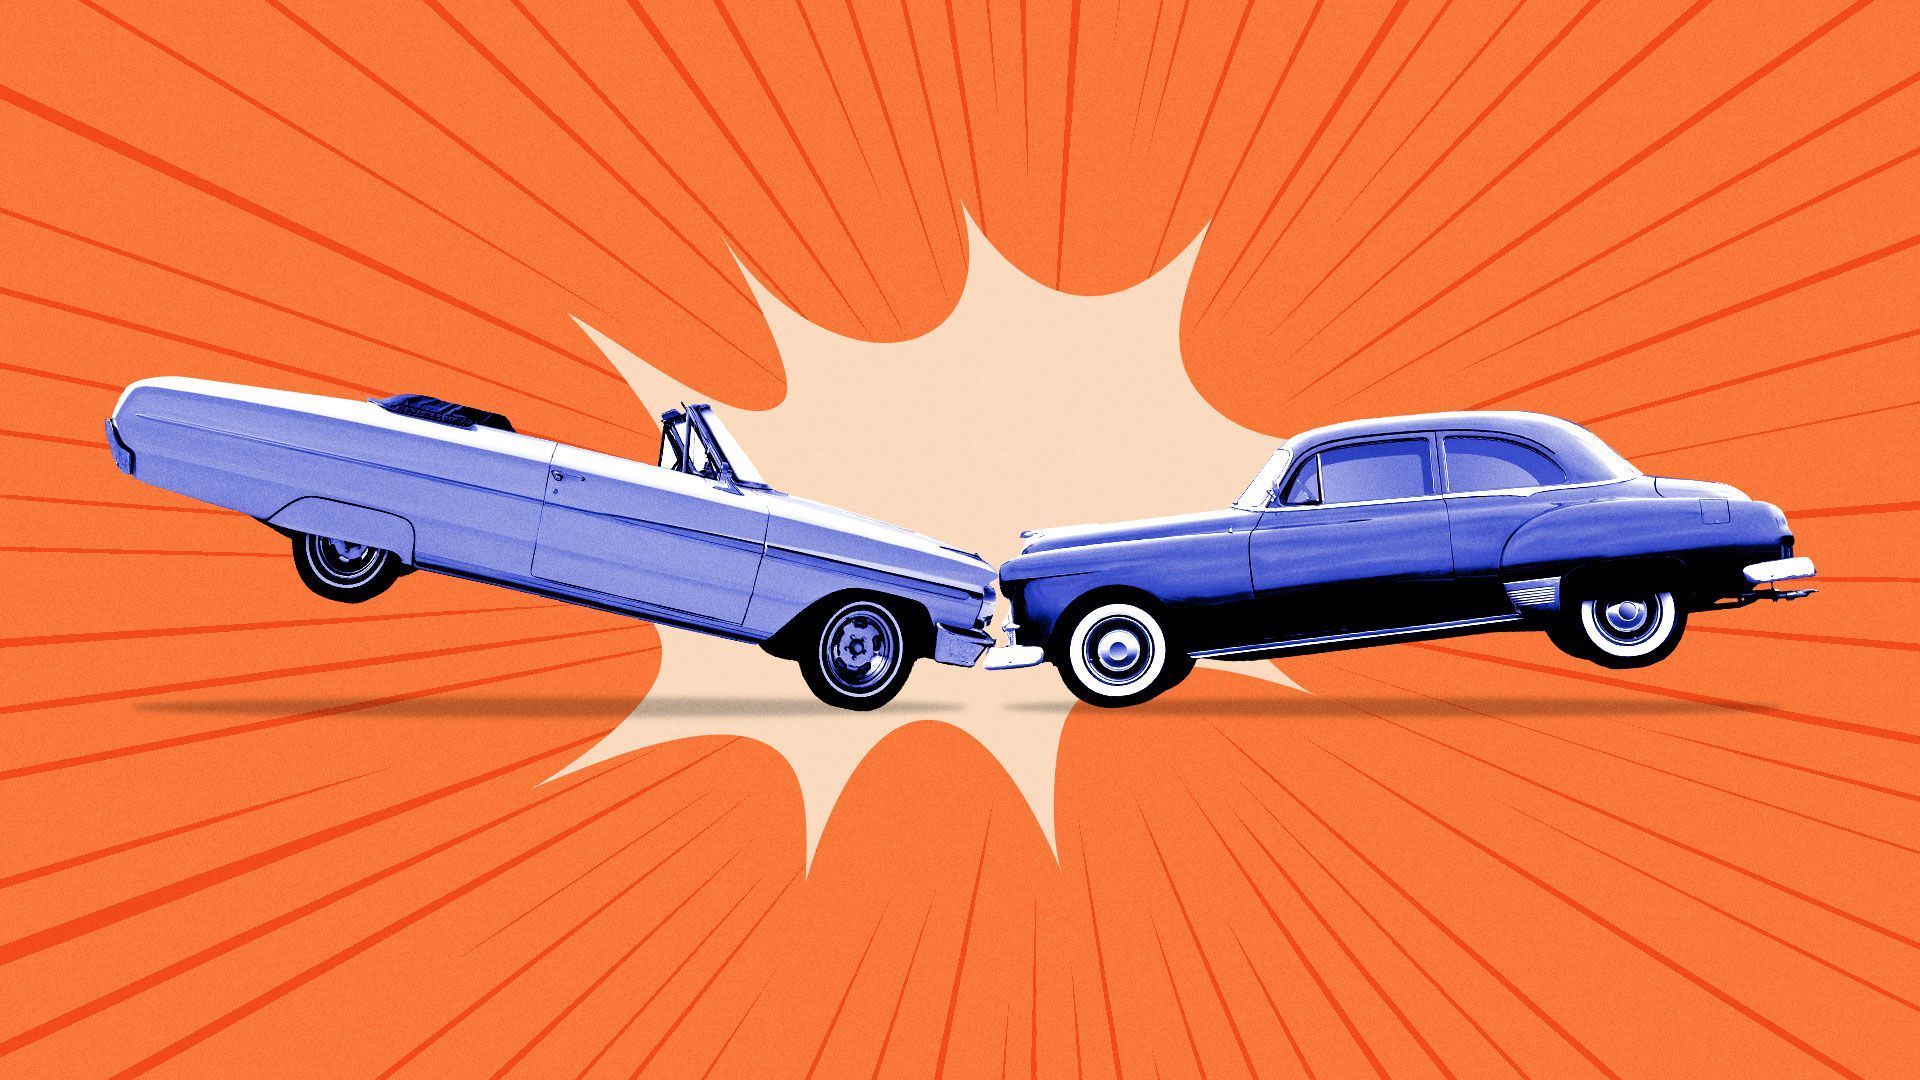 Illustration of two cars crashing with a comic book explosion